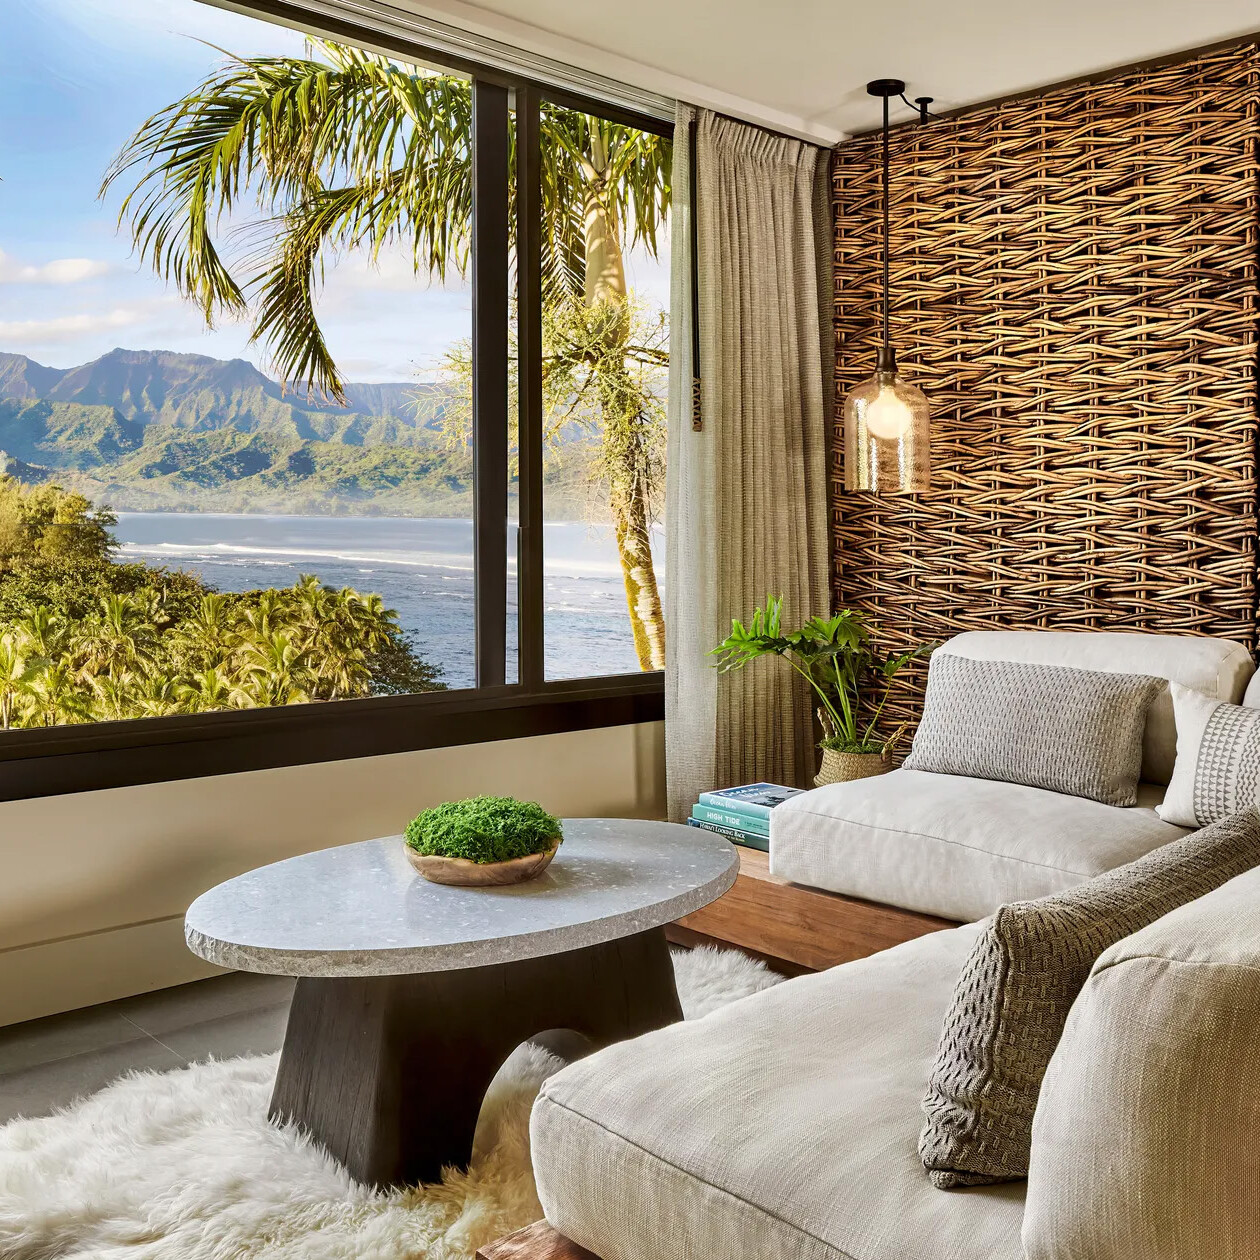 sempre in and outdoor living 1 hotel hanalei bay 1hotel rm722 5 copymf rt v3